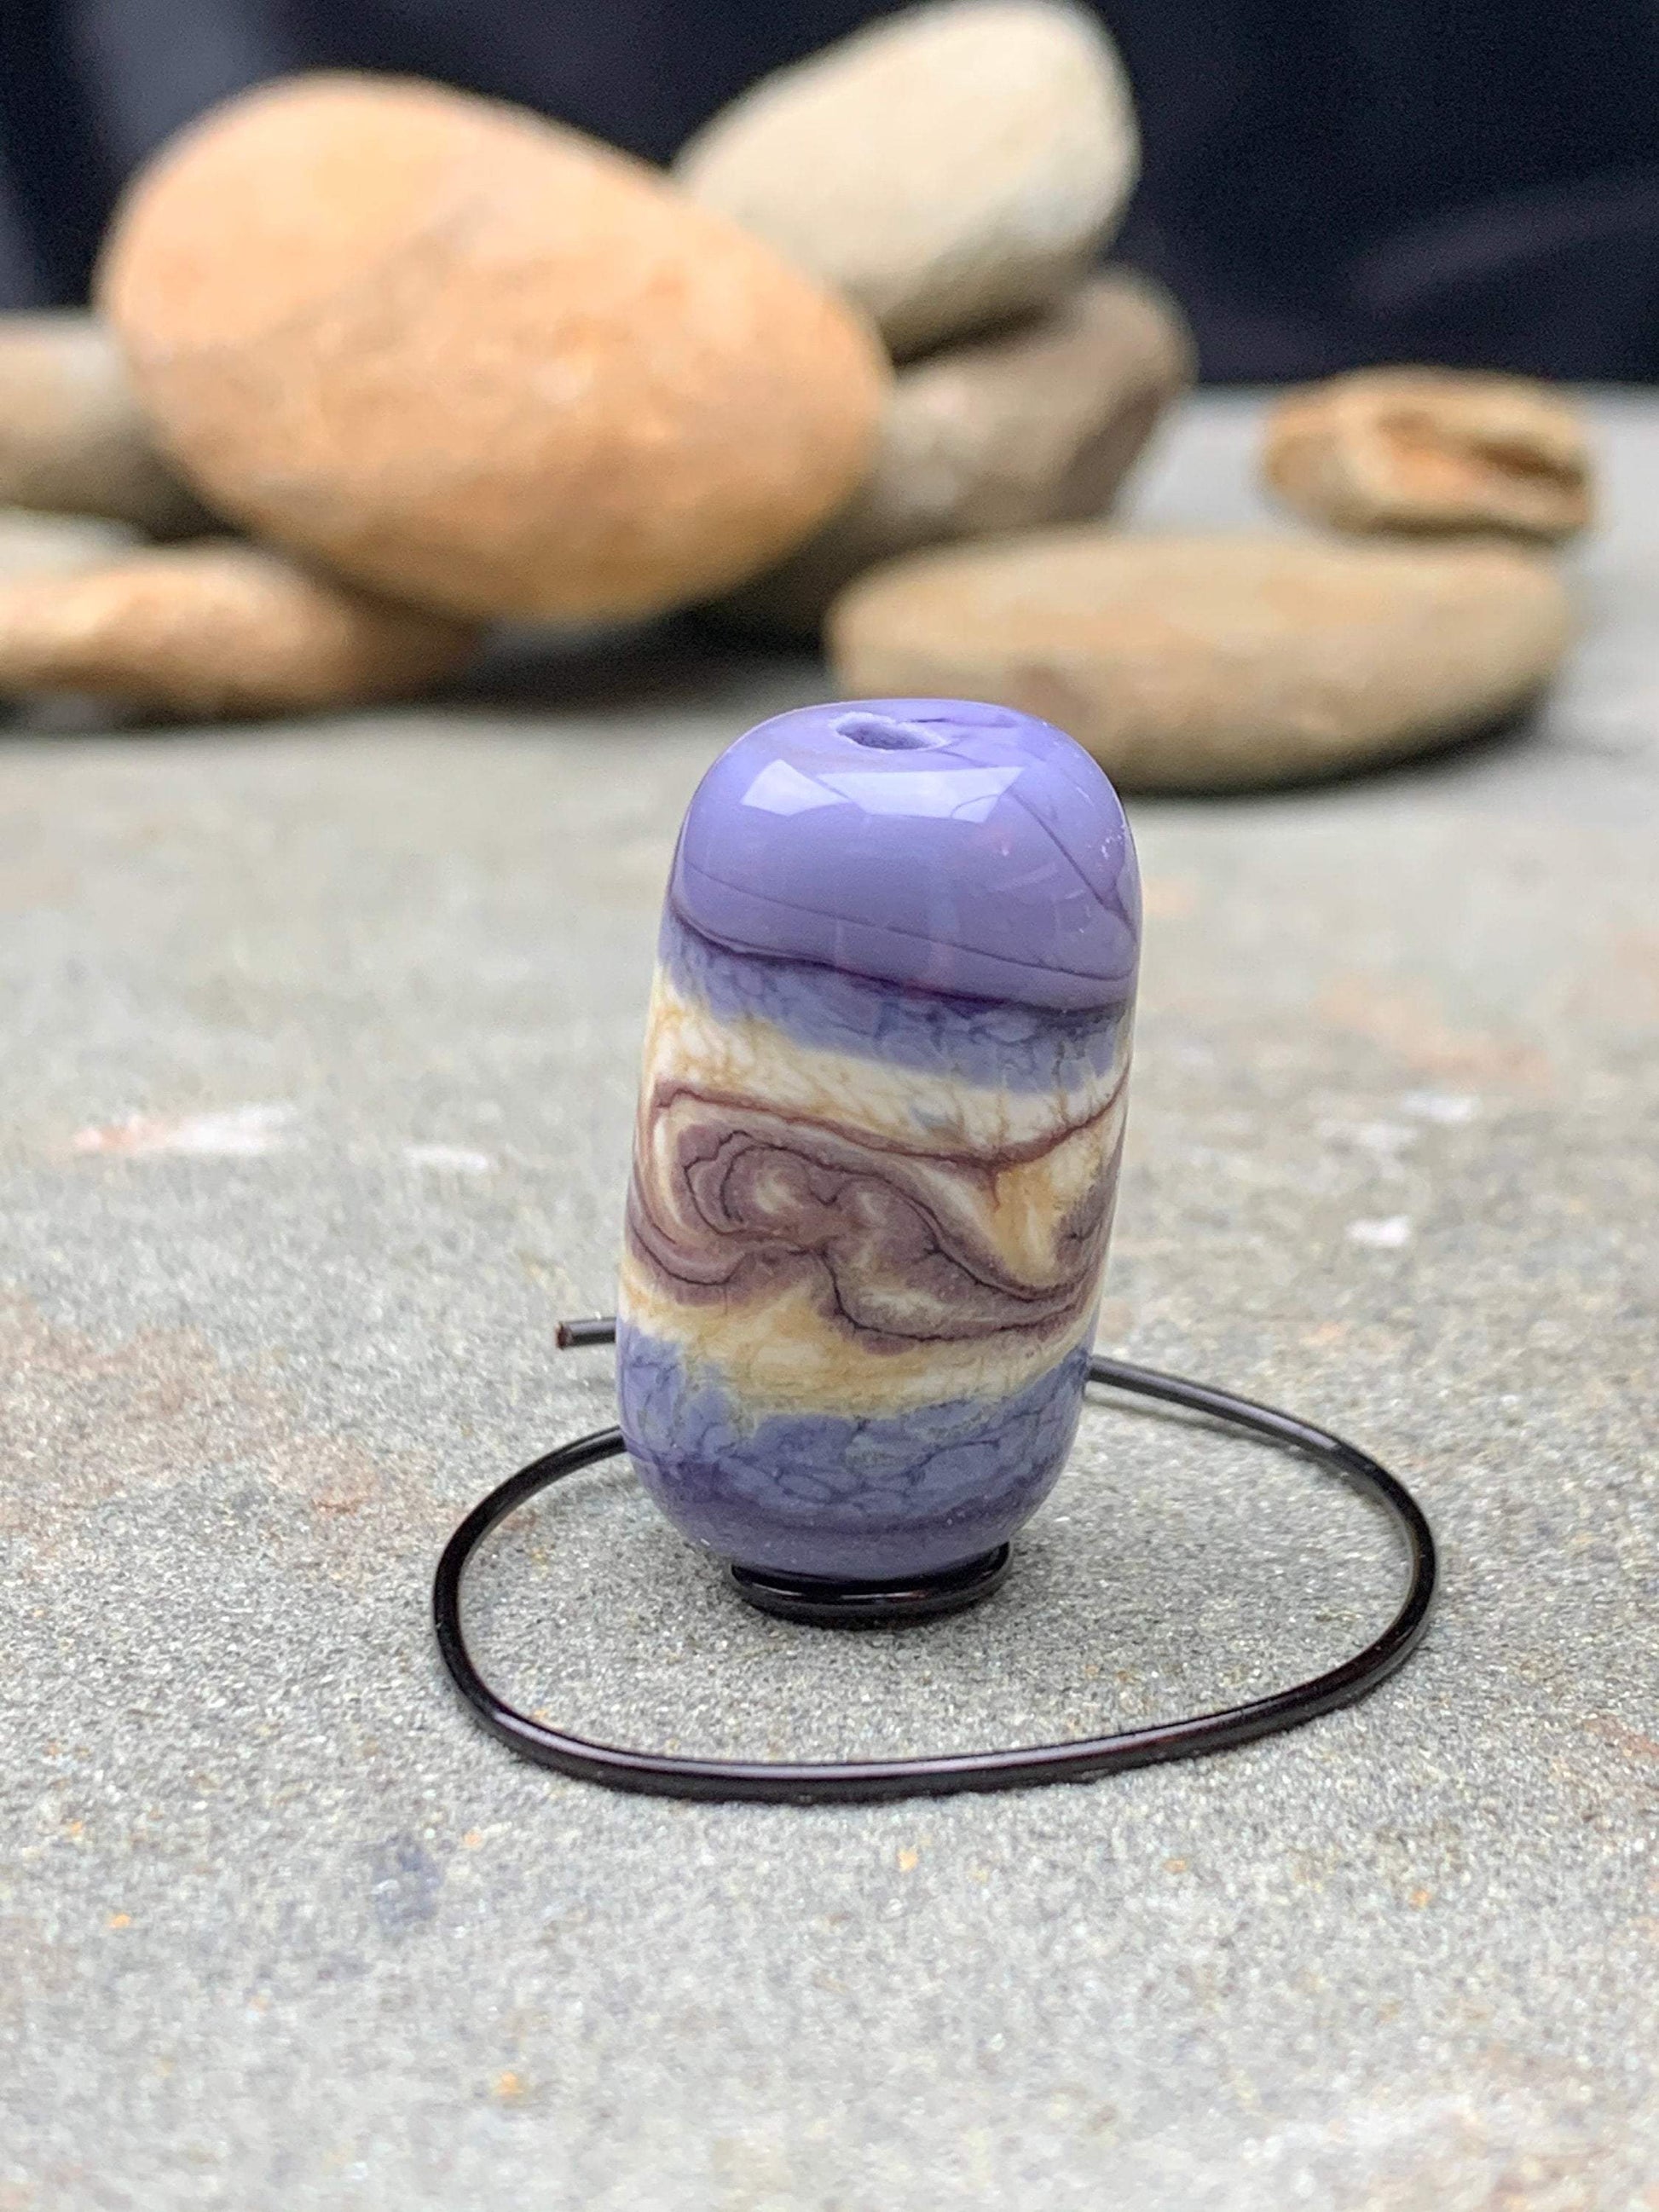 Ivory and Purple Swirled Glass Bead - Handmade Glass Lampwork Focal Bead, Glass Bead for Jewelry, Statement Bead for Pendant